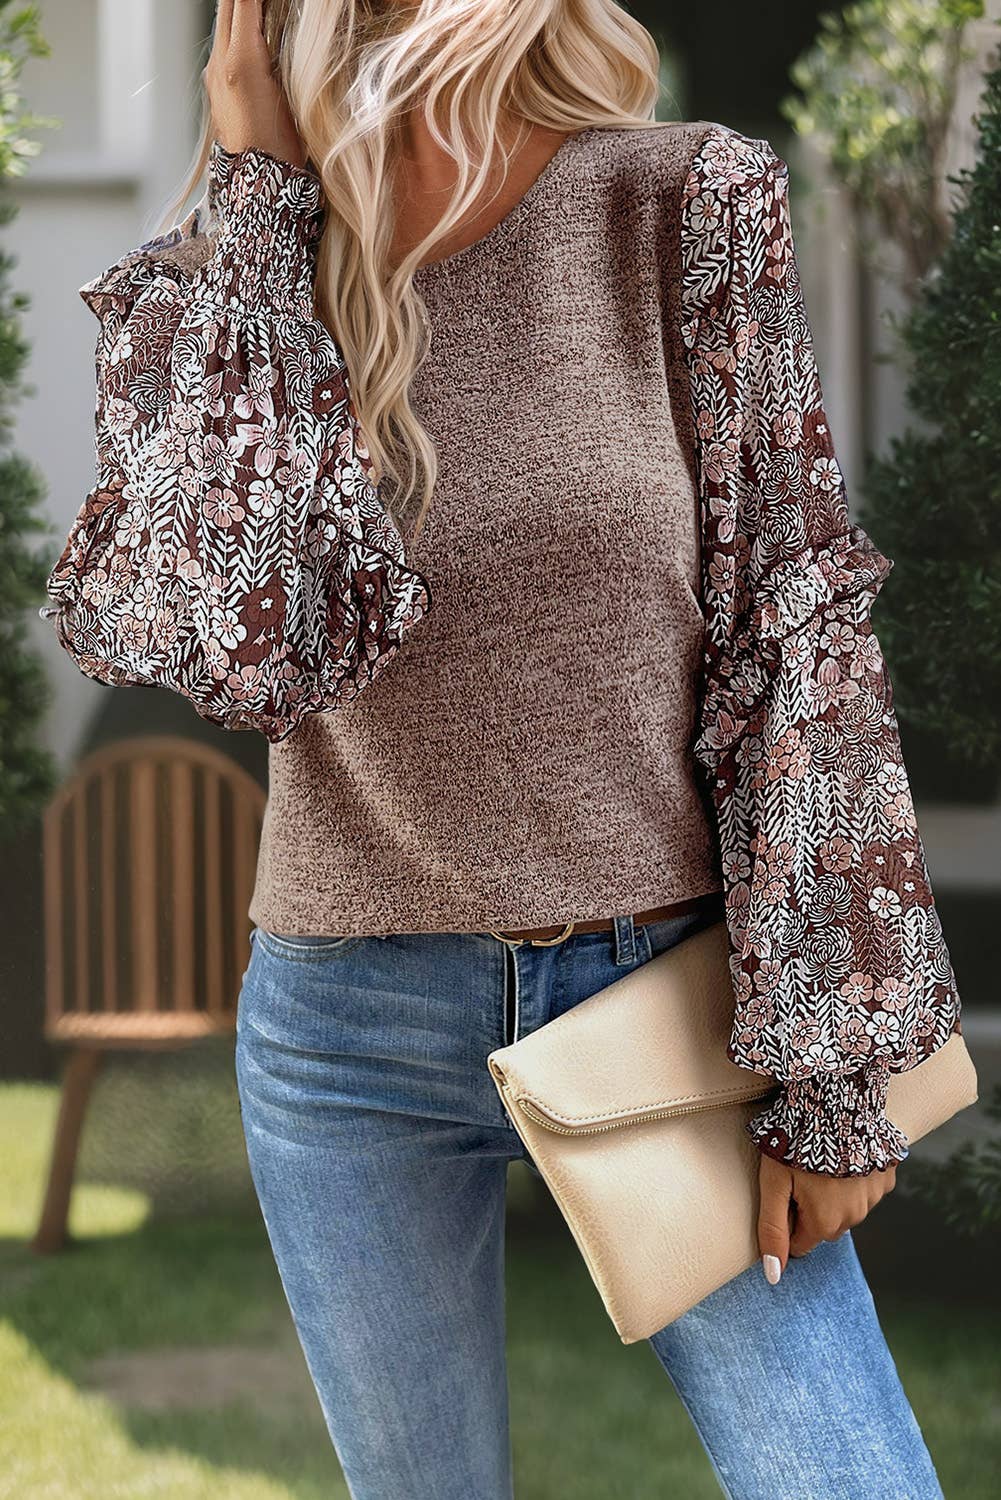 Apricot Pink Contrast Frilled Floral Sleeve Top: L / Apricot Pink